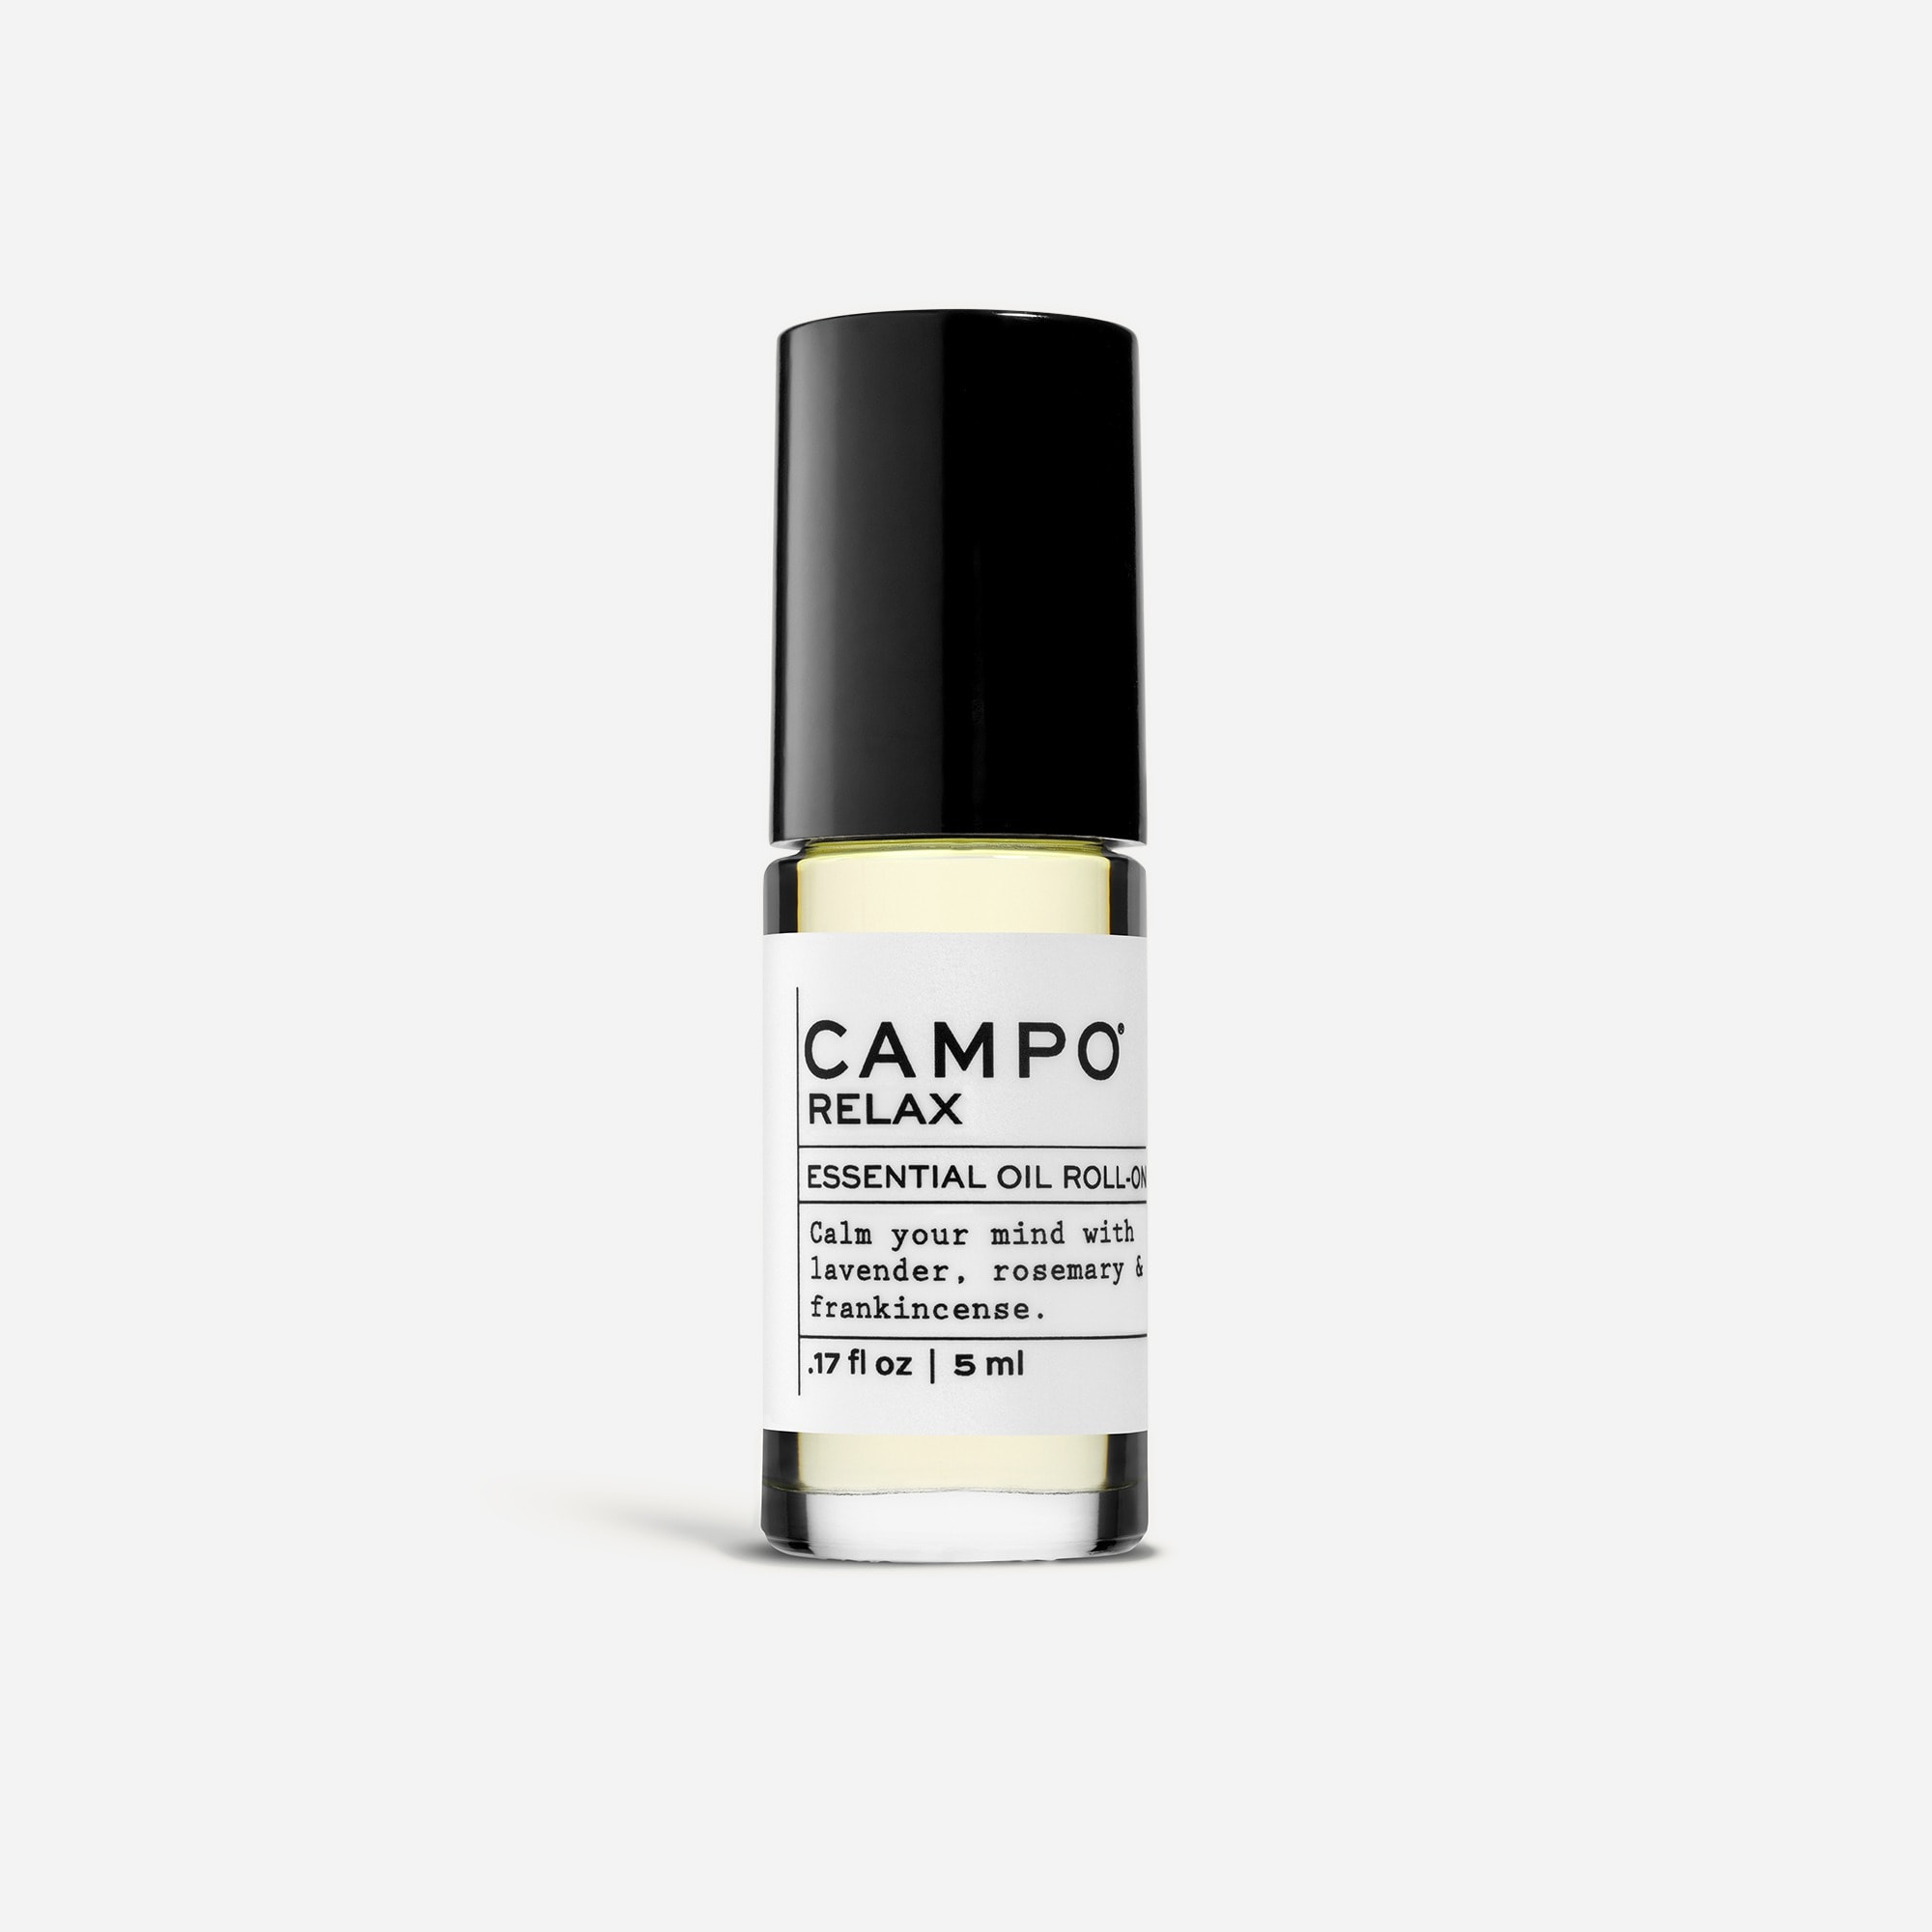  CAMPO® RELAX roll-on oil